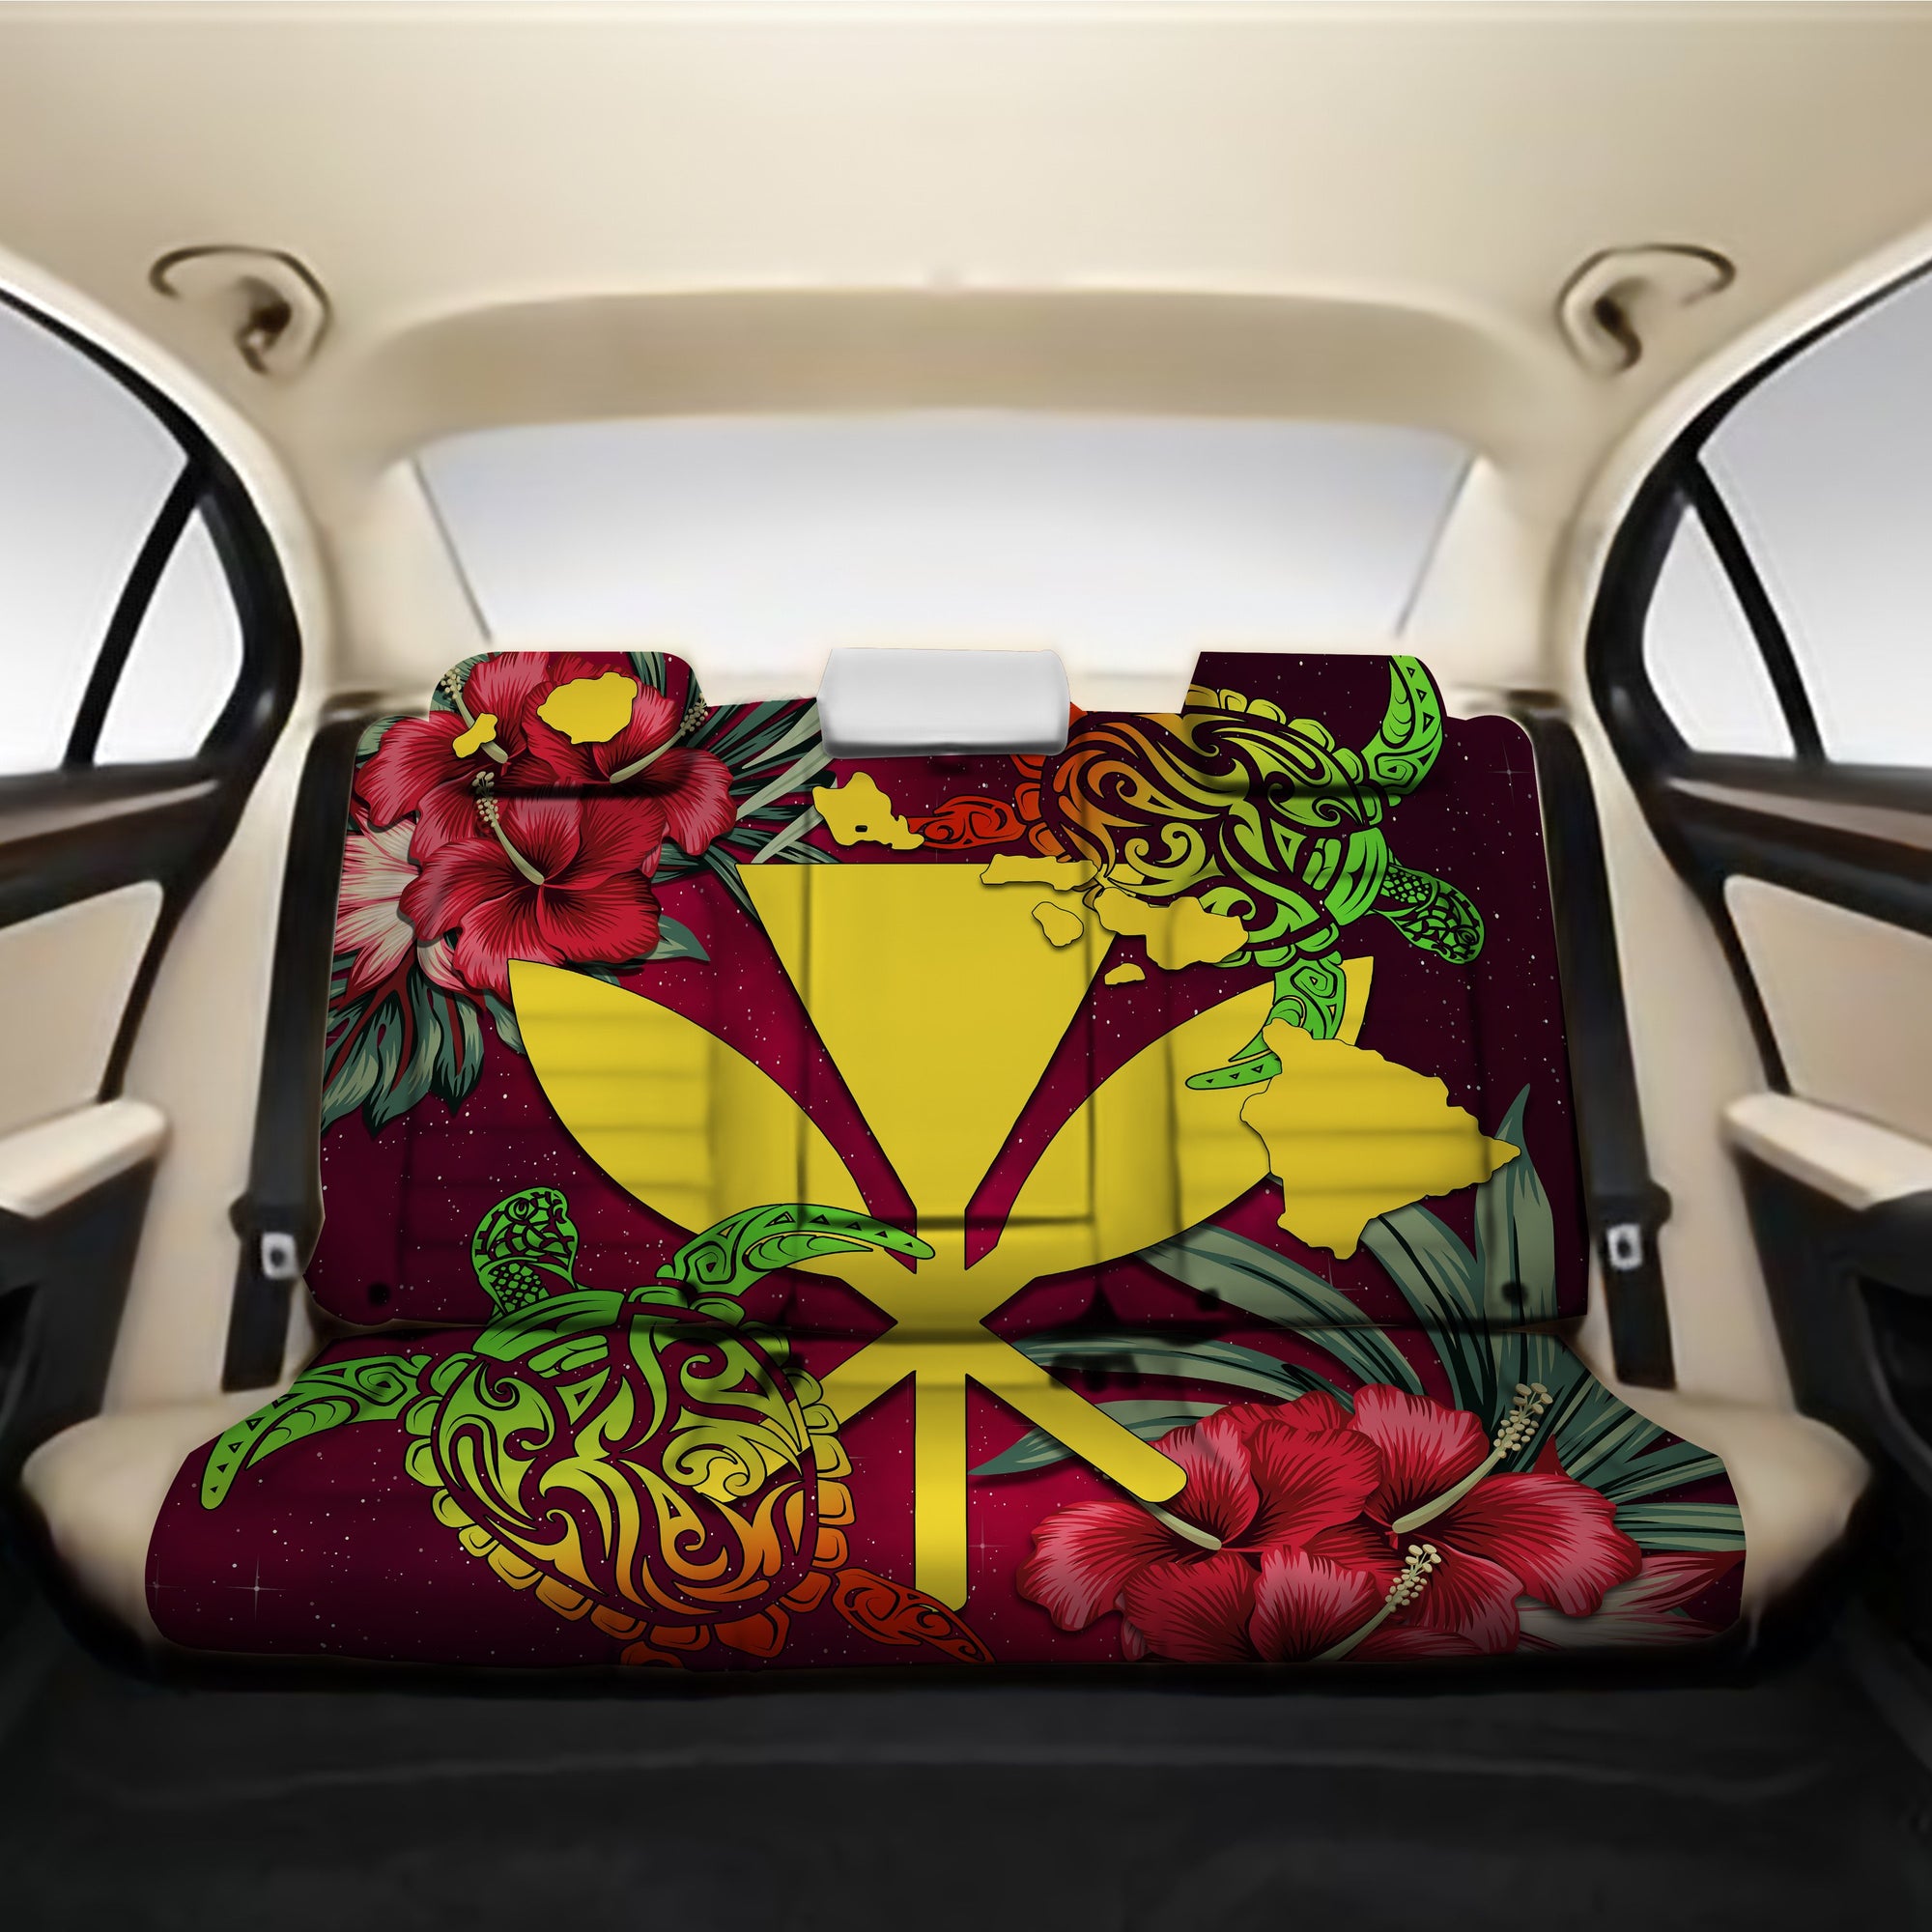 Kanaka Map Turtle Hibiscus Back Seat Cover - Red Velvet - AH One Size Red Back Car Seat Covers - Polynesian Pride